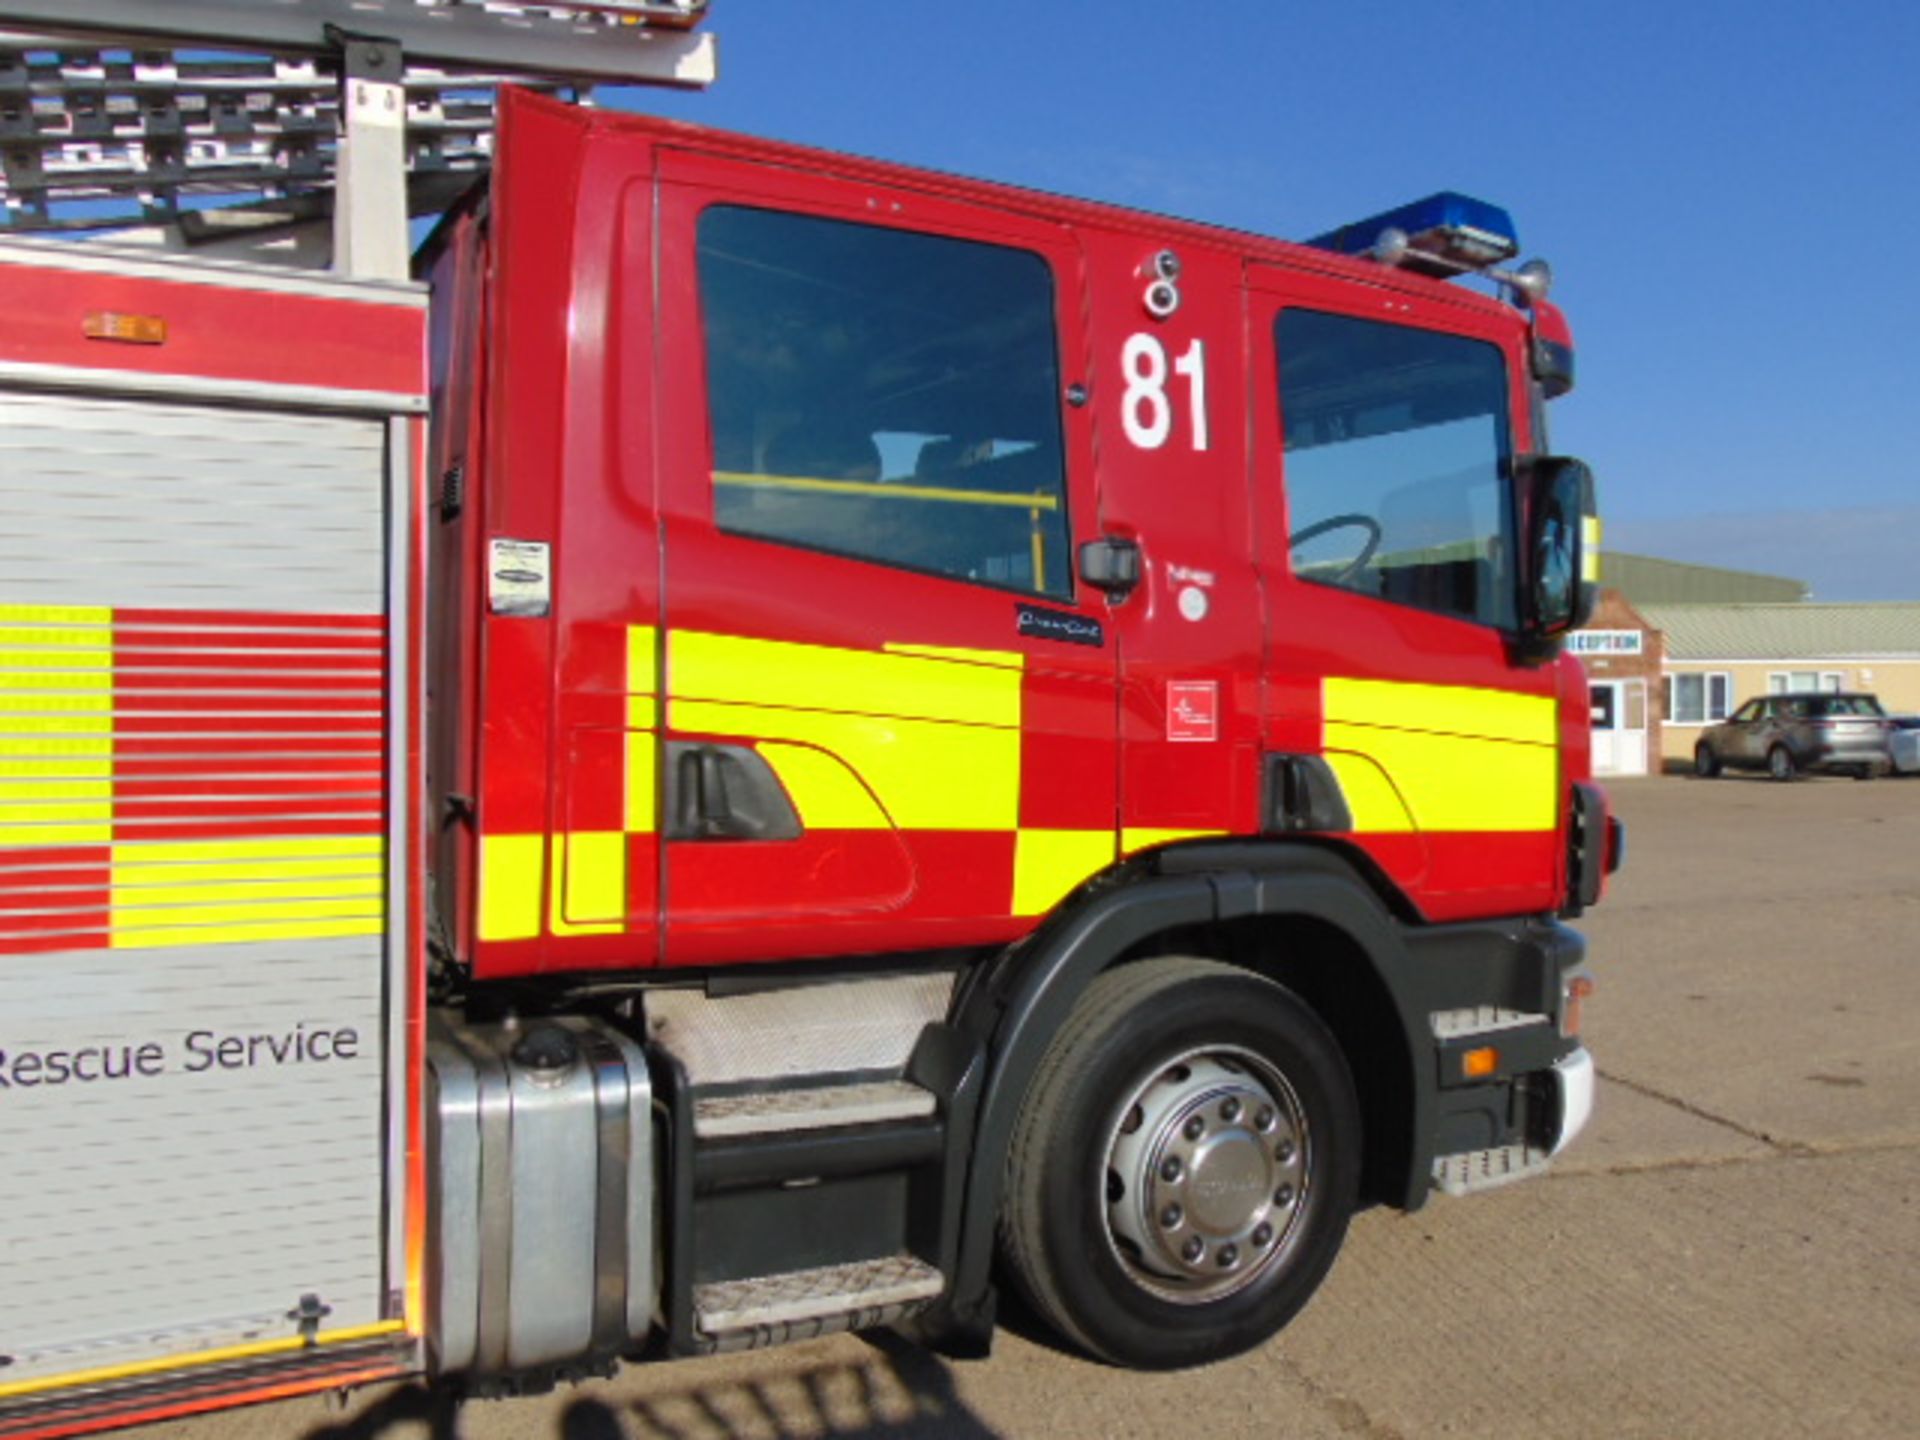 Scania 94D 260 / Emergency One Fire Engine - Image 8 of 28